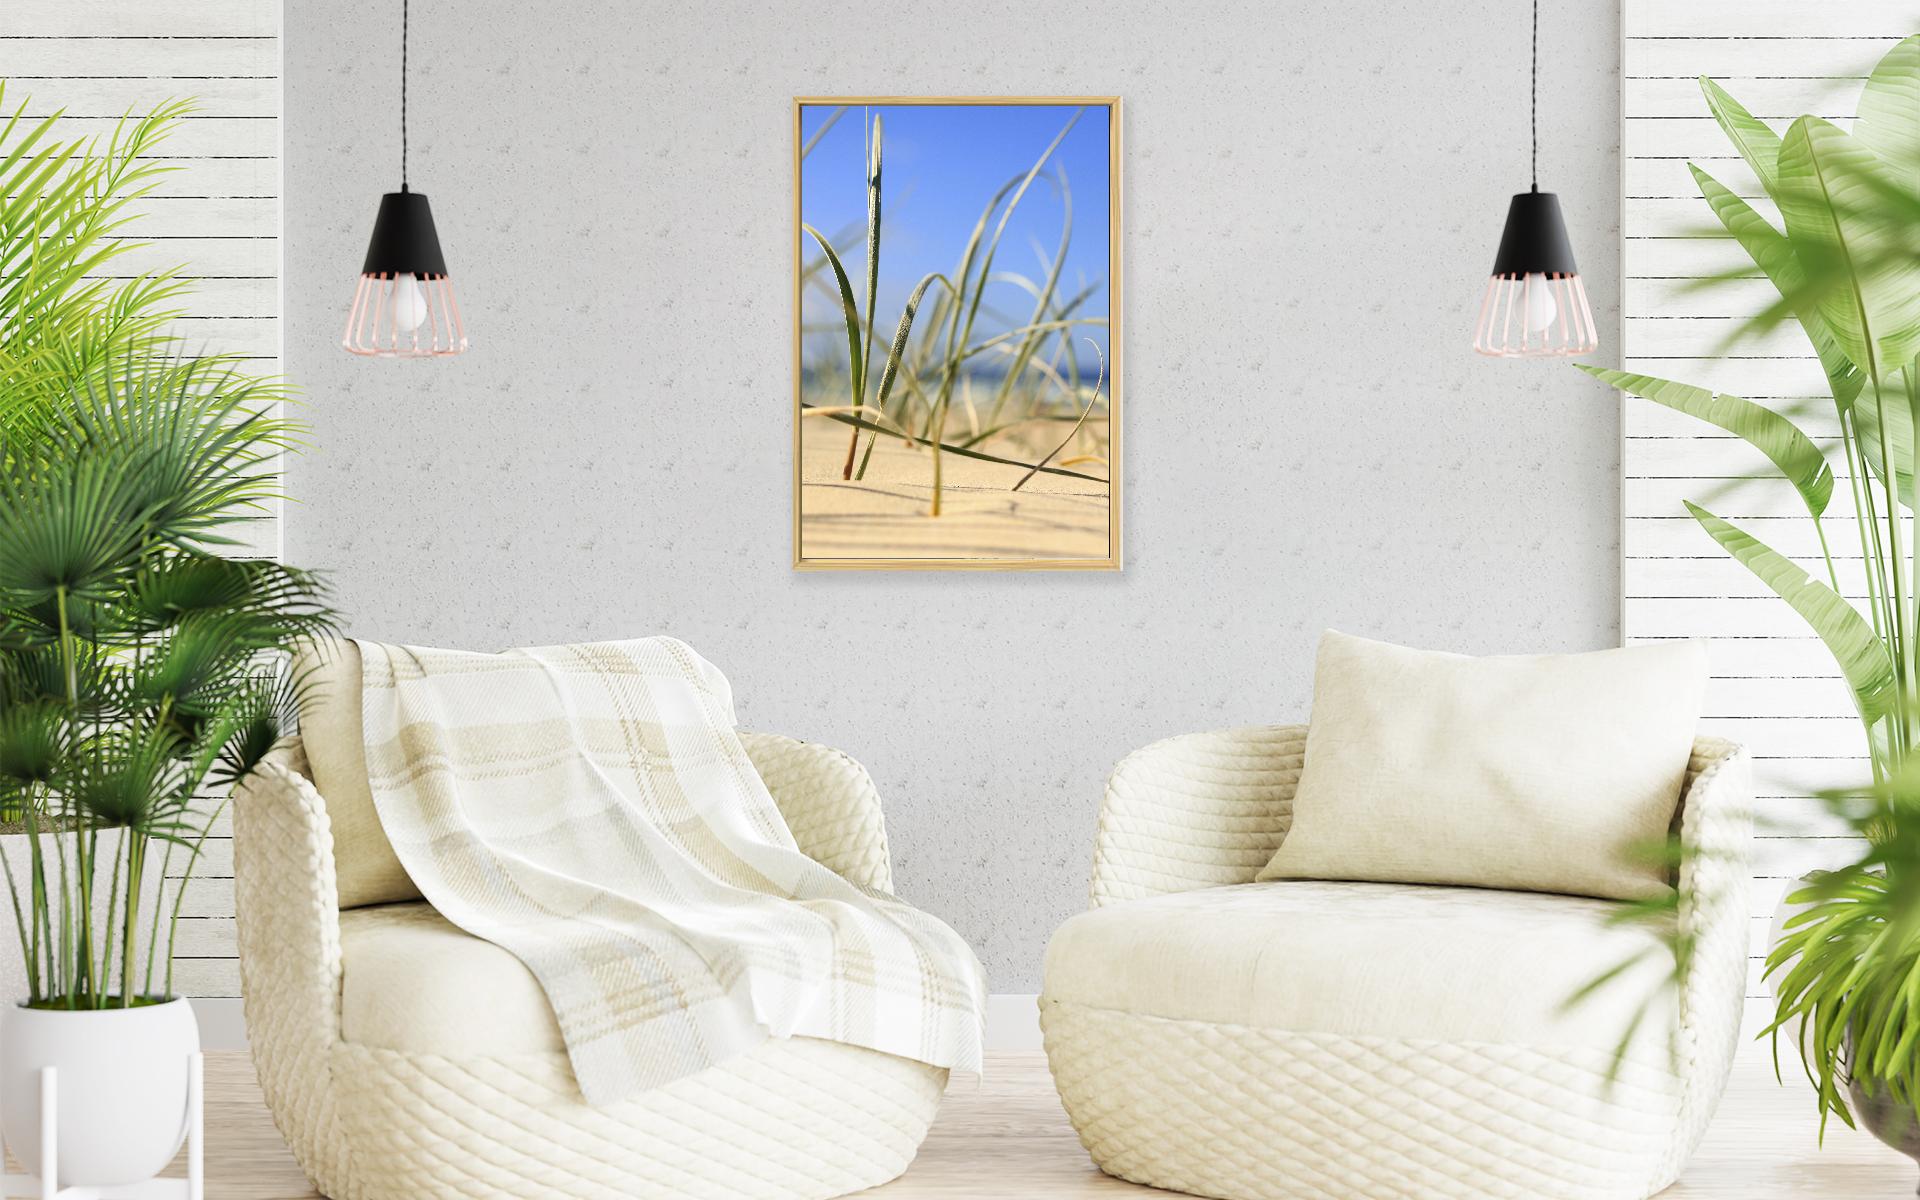 Image 9 - Seagrass-frame-4